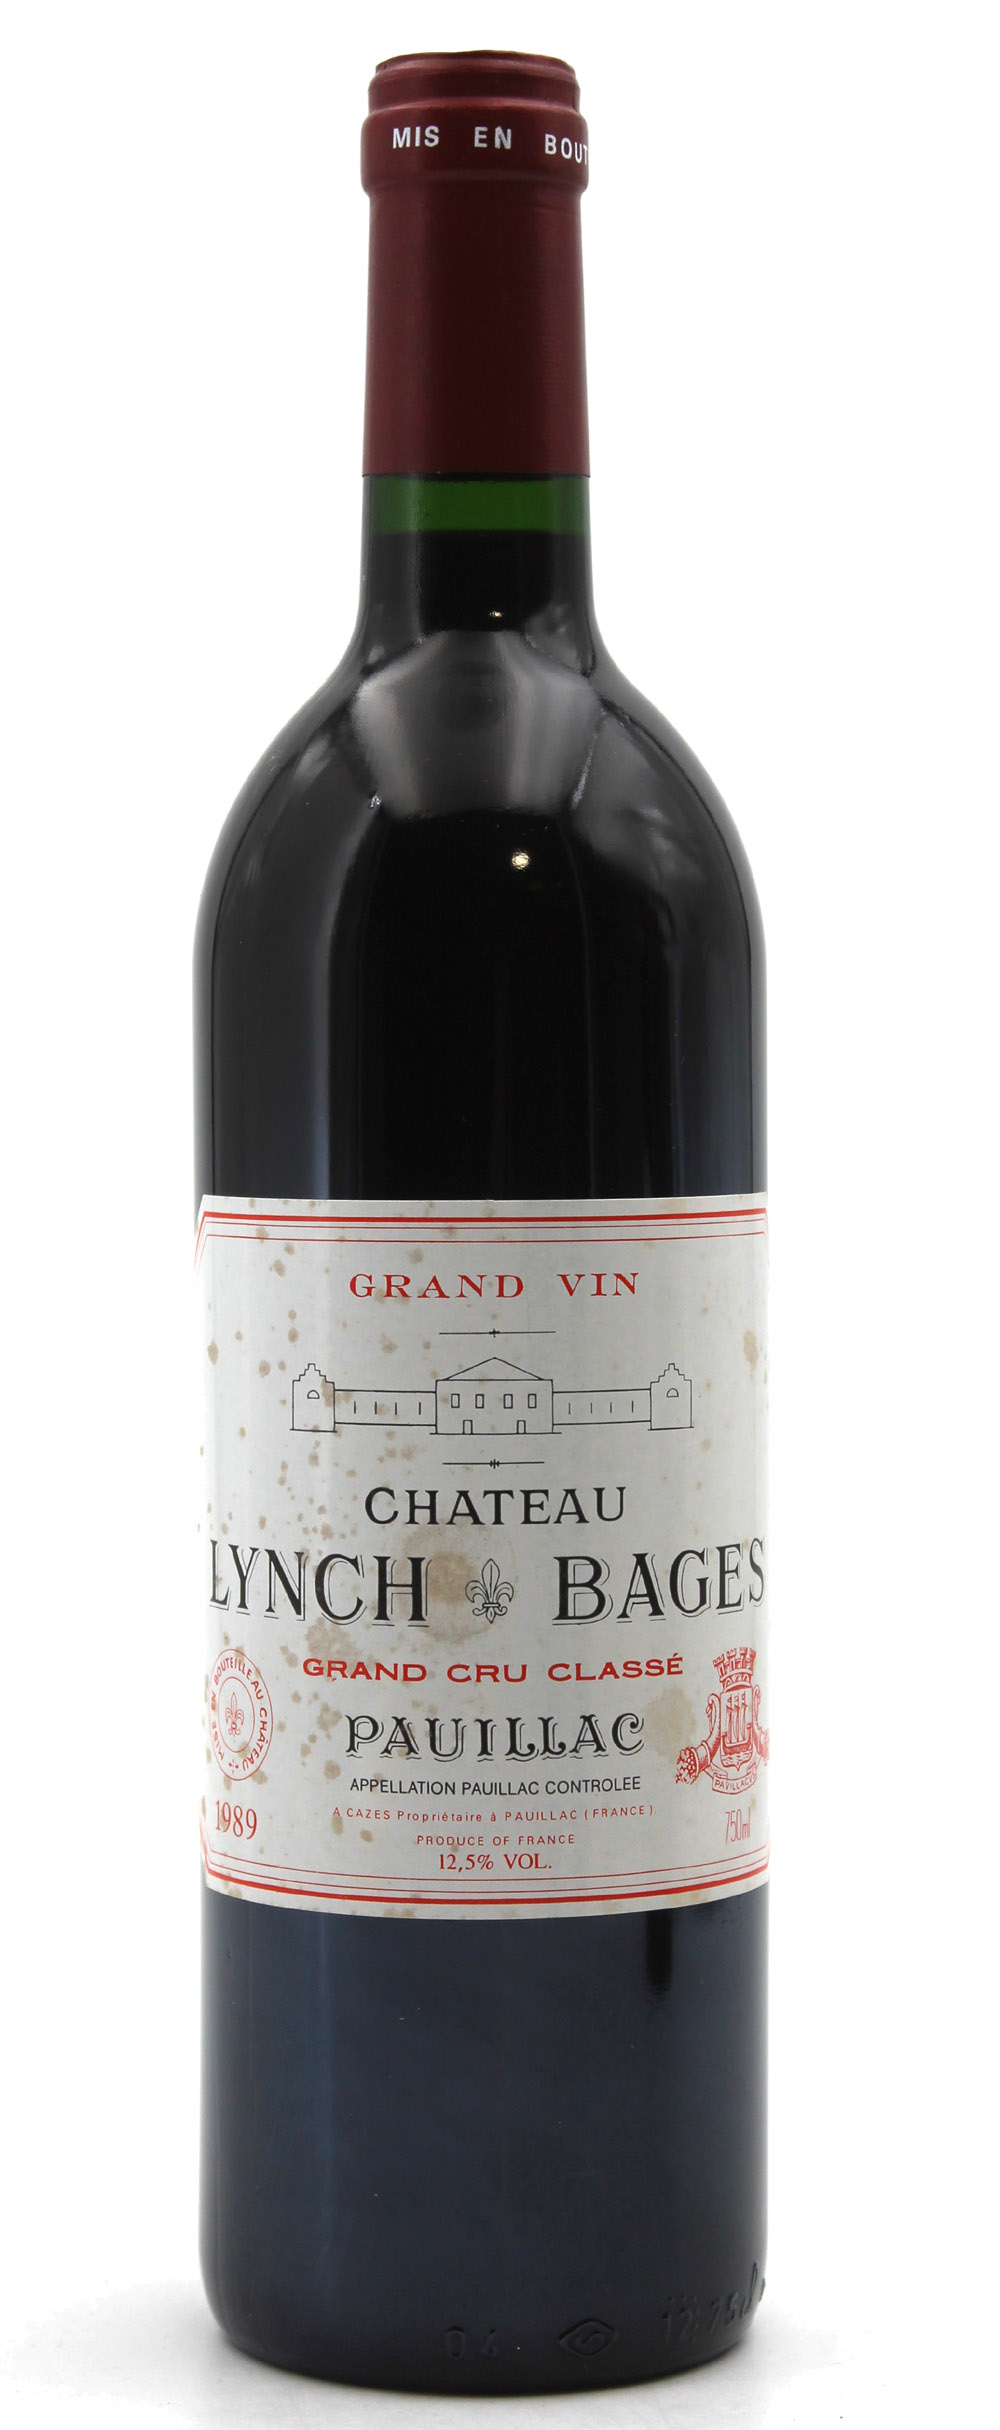 Lynch bages 1989